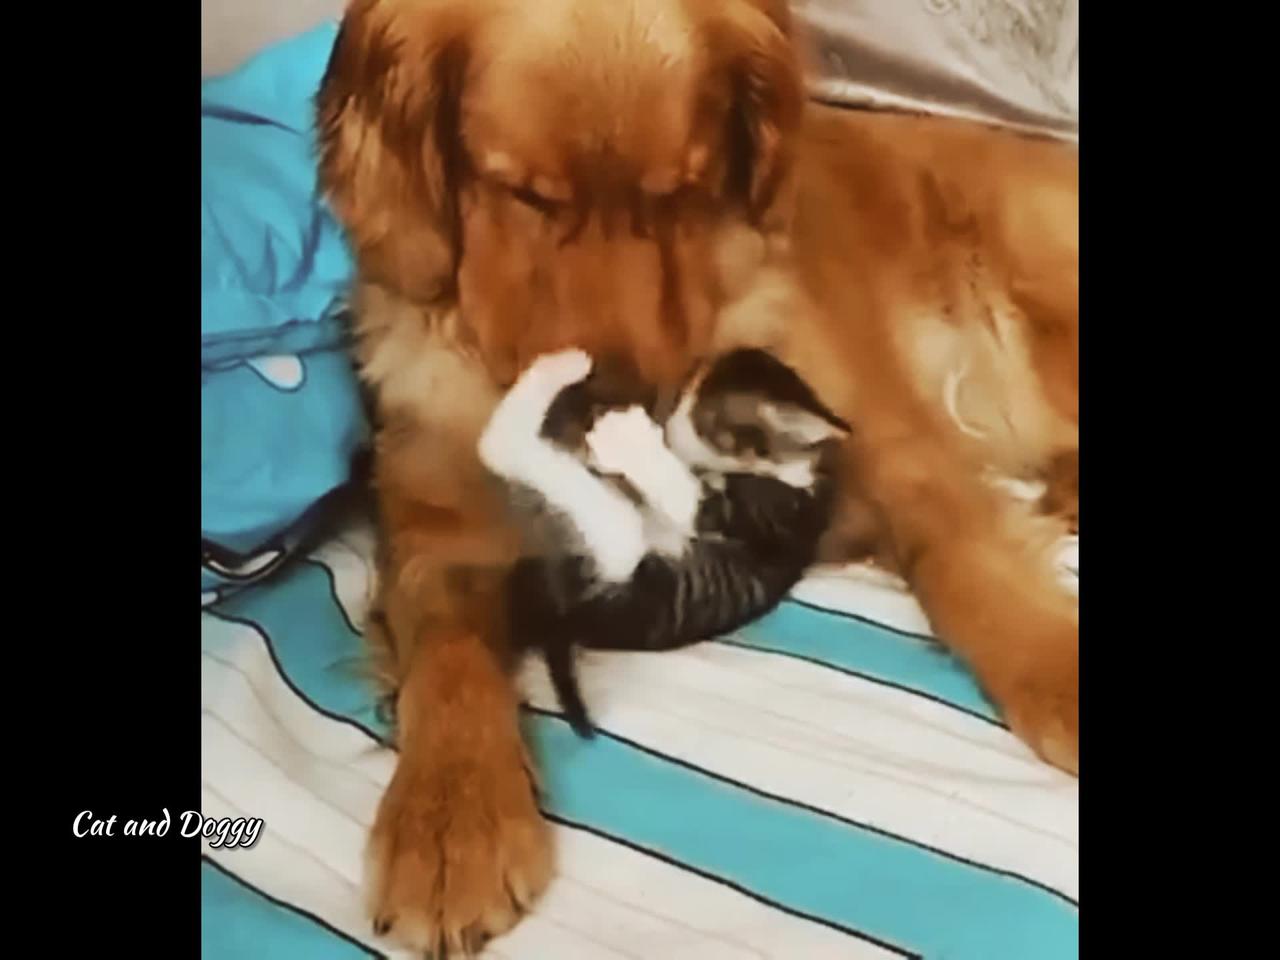 Doggy And Cat playing with each other 🖤